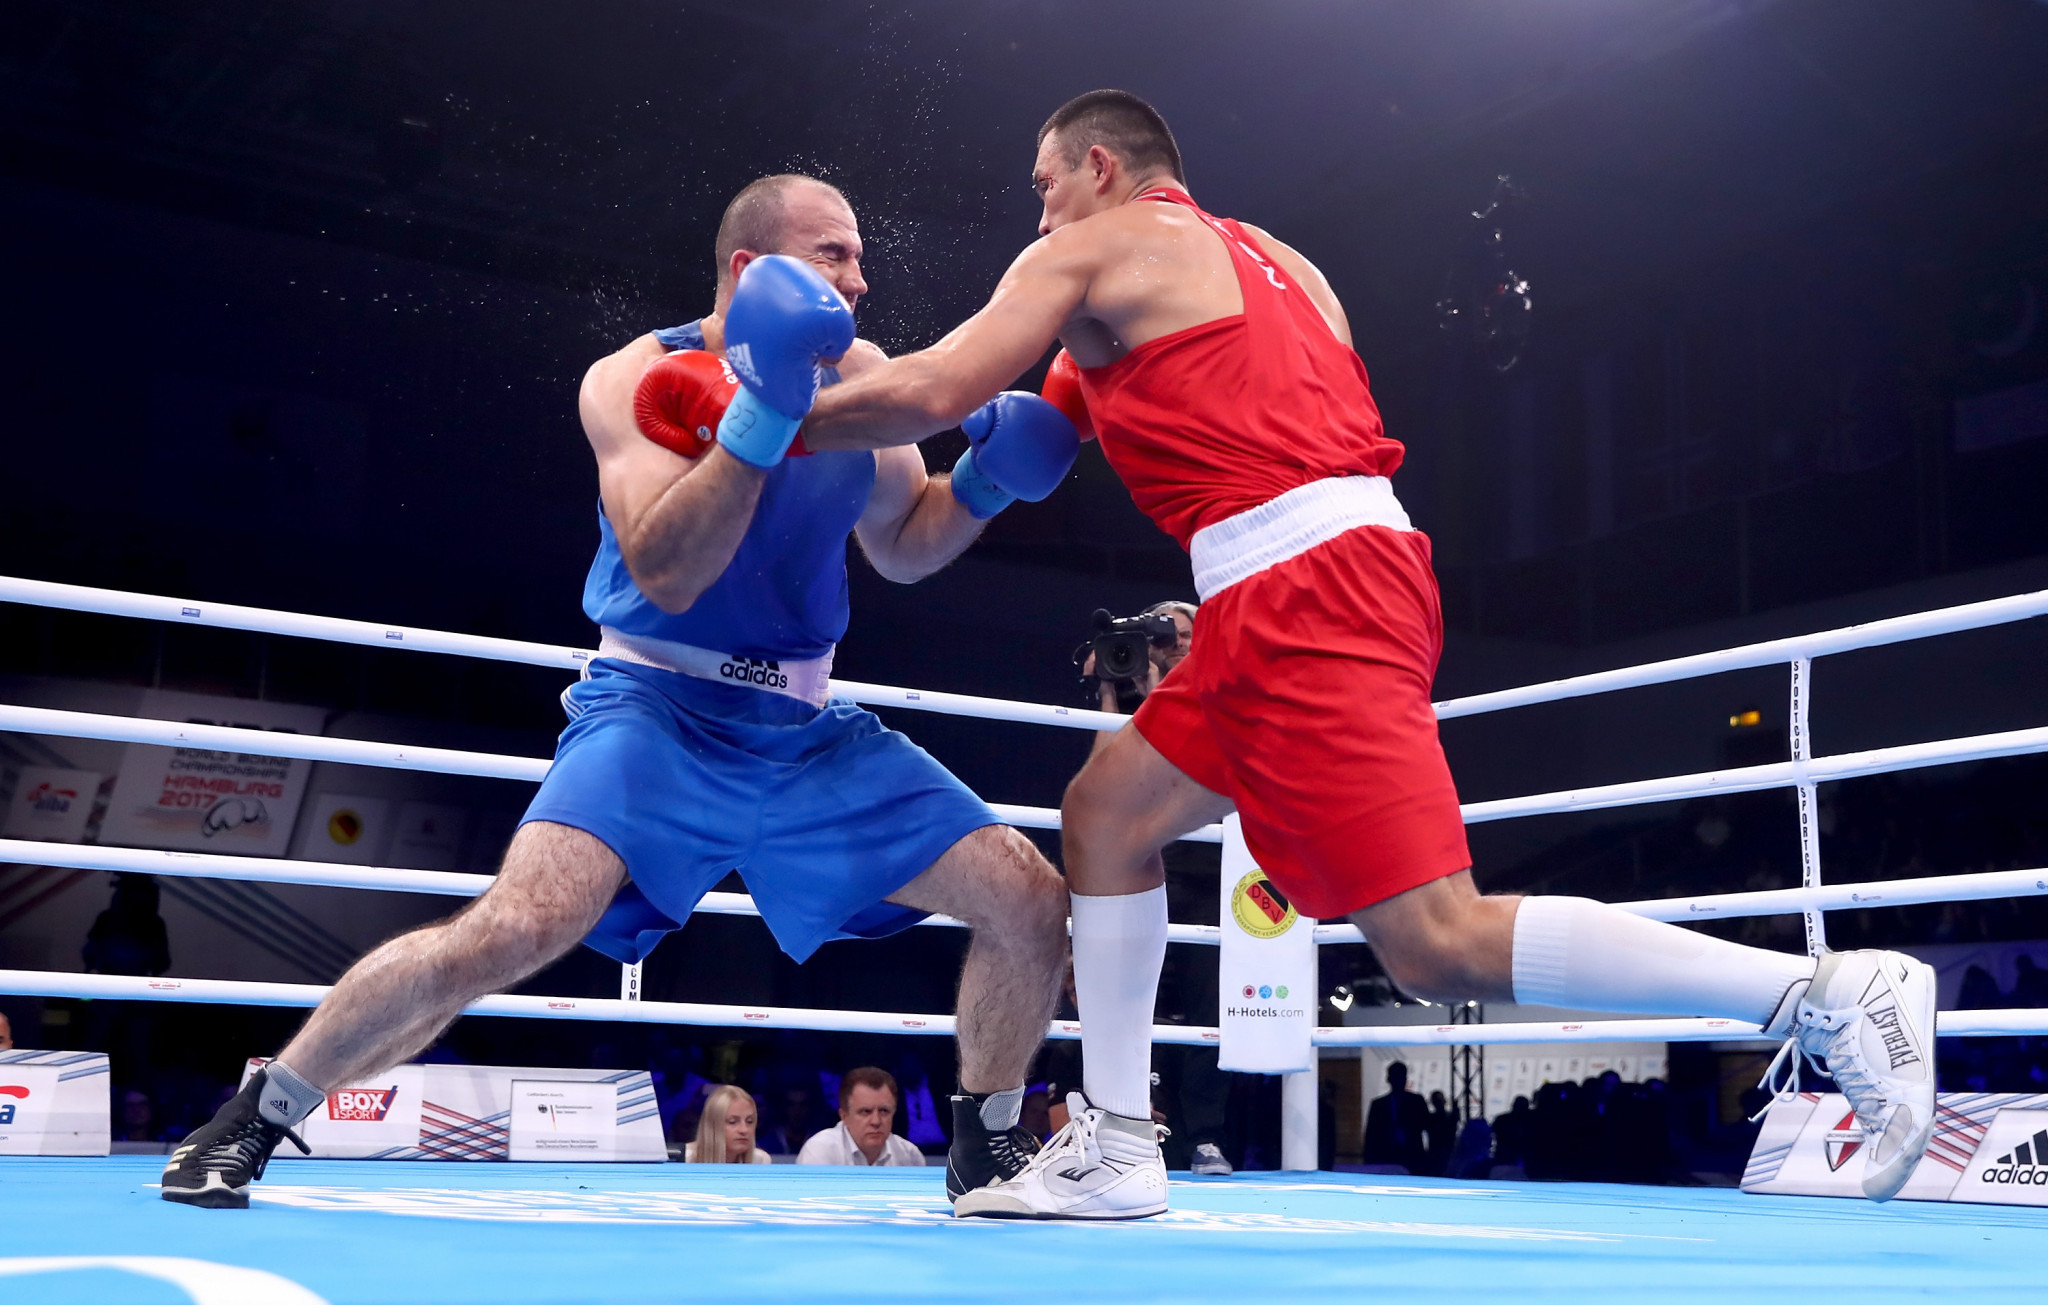 AIBA receive list of 41 questions as probe into boxing's Olympic future continues